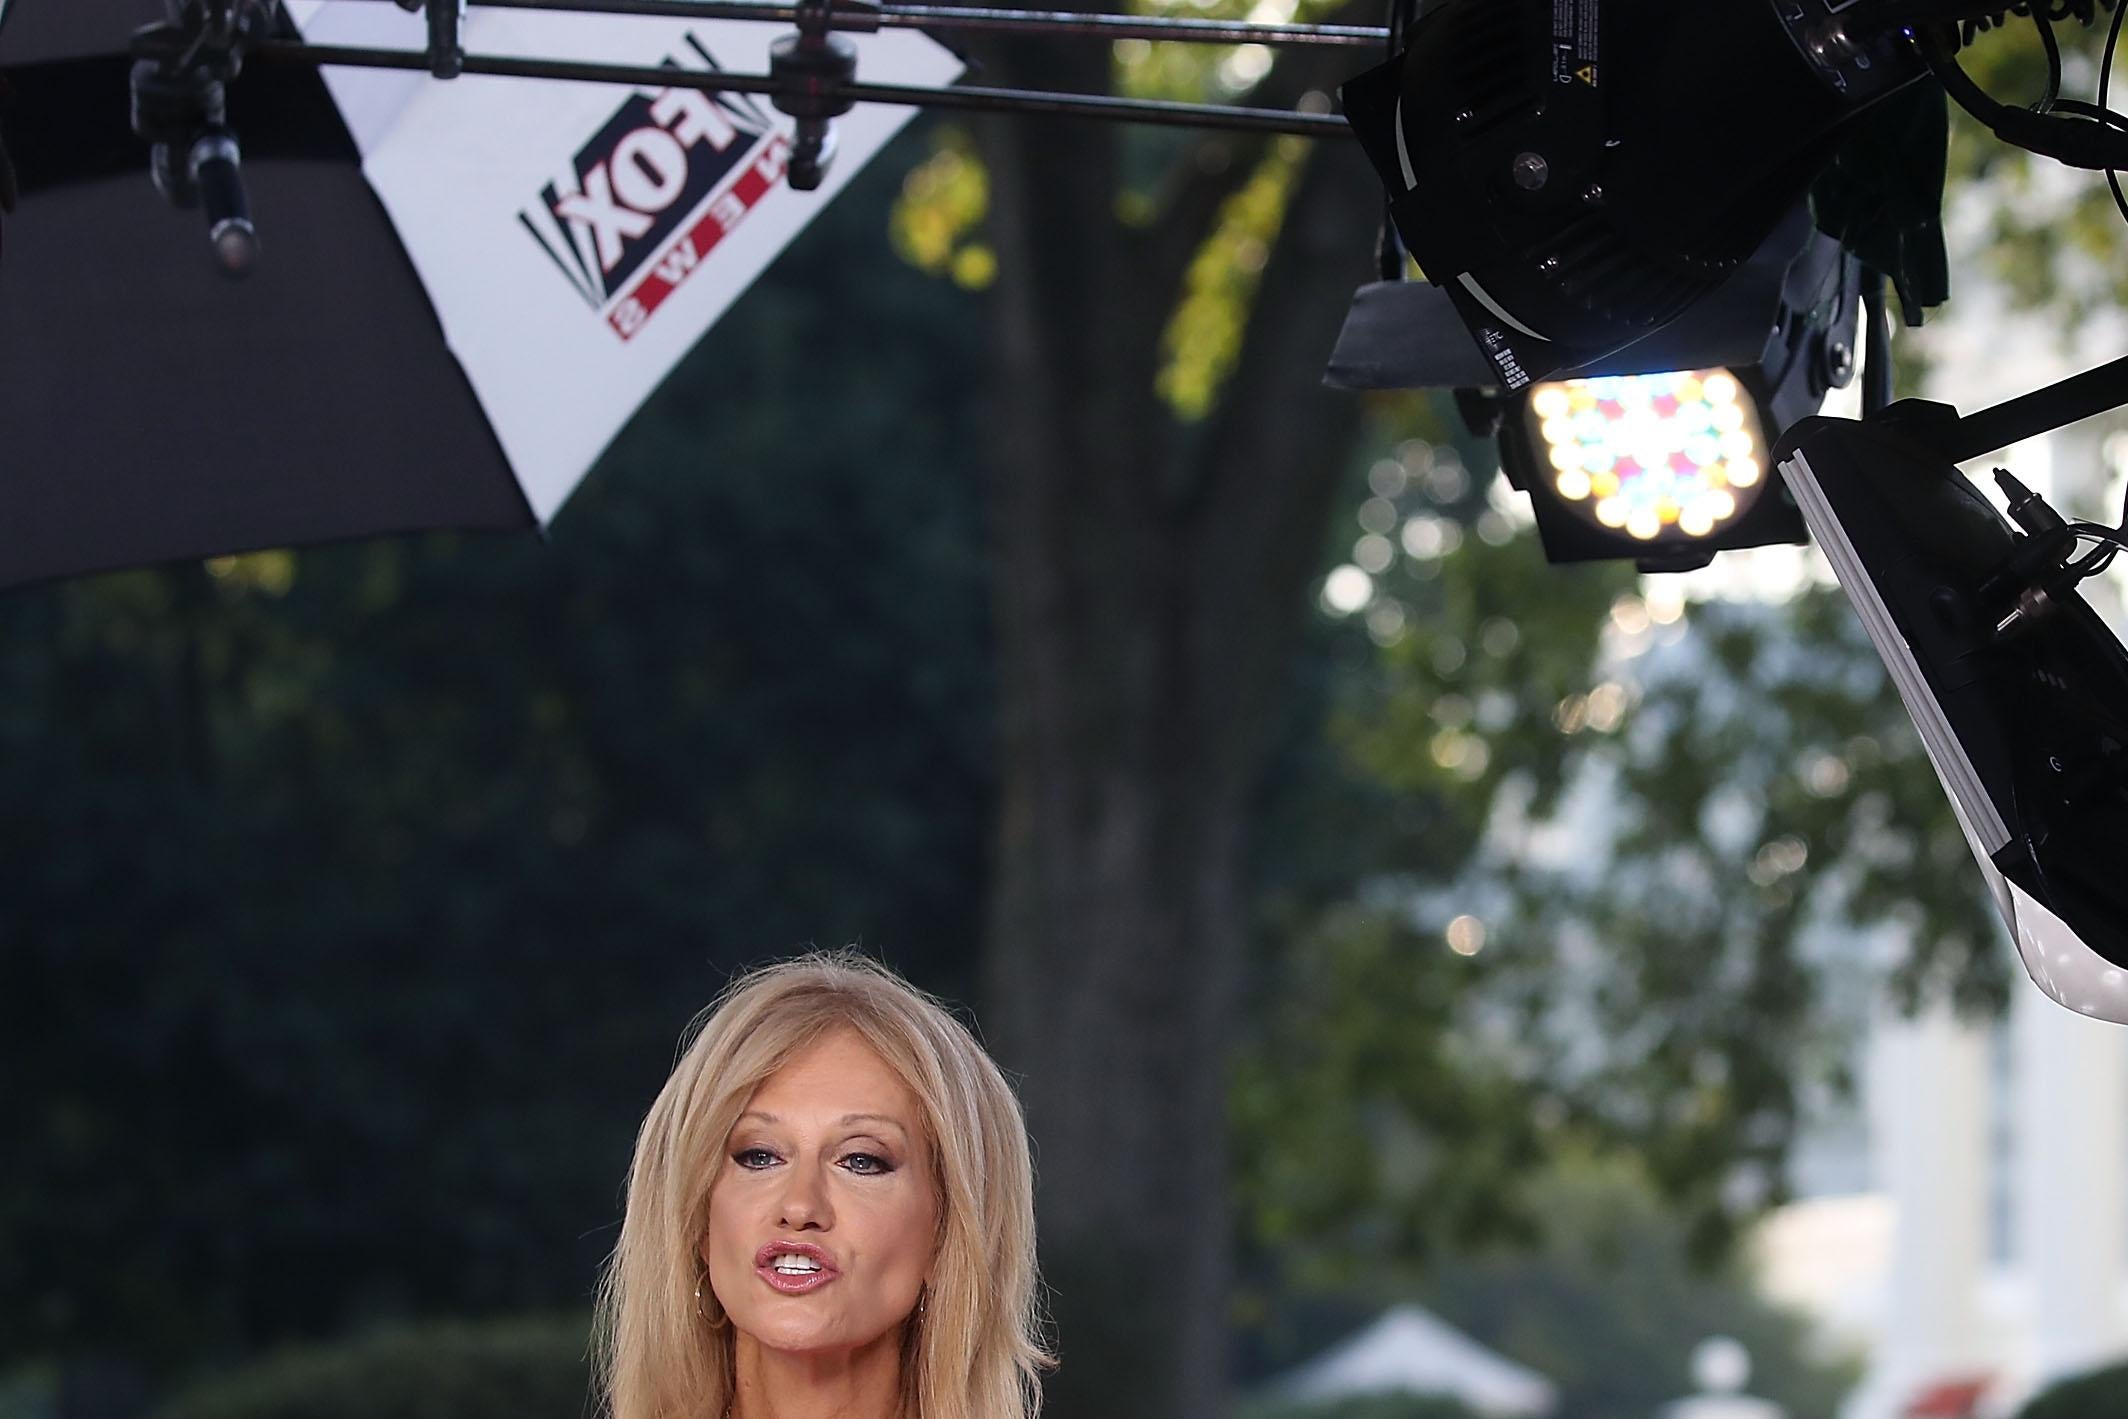 Kellyanne Conway appears on a morning television show, from the North Lawn of the White House on August 17, 2018 in Washington, DC.